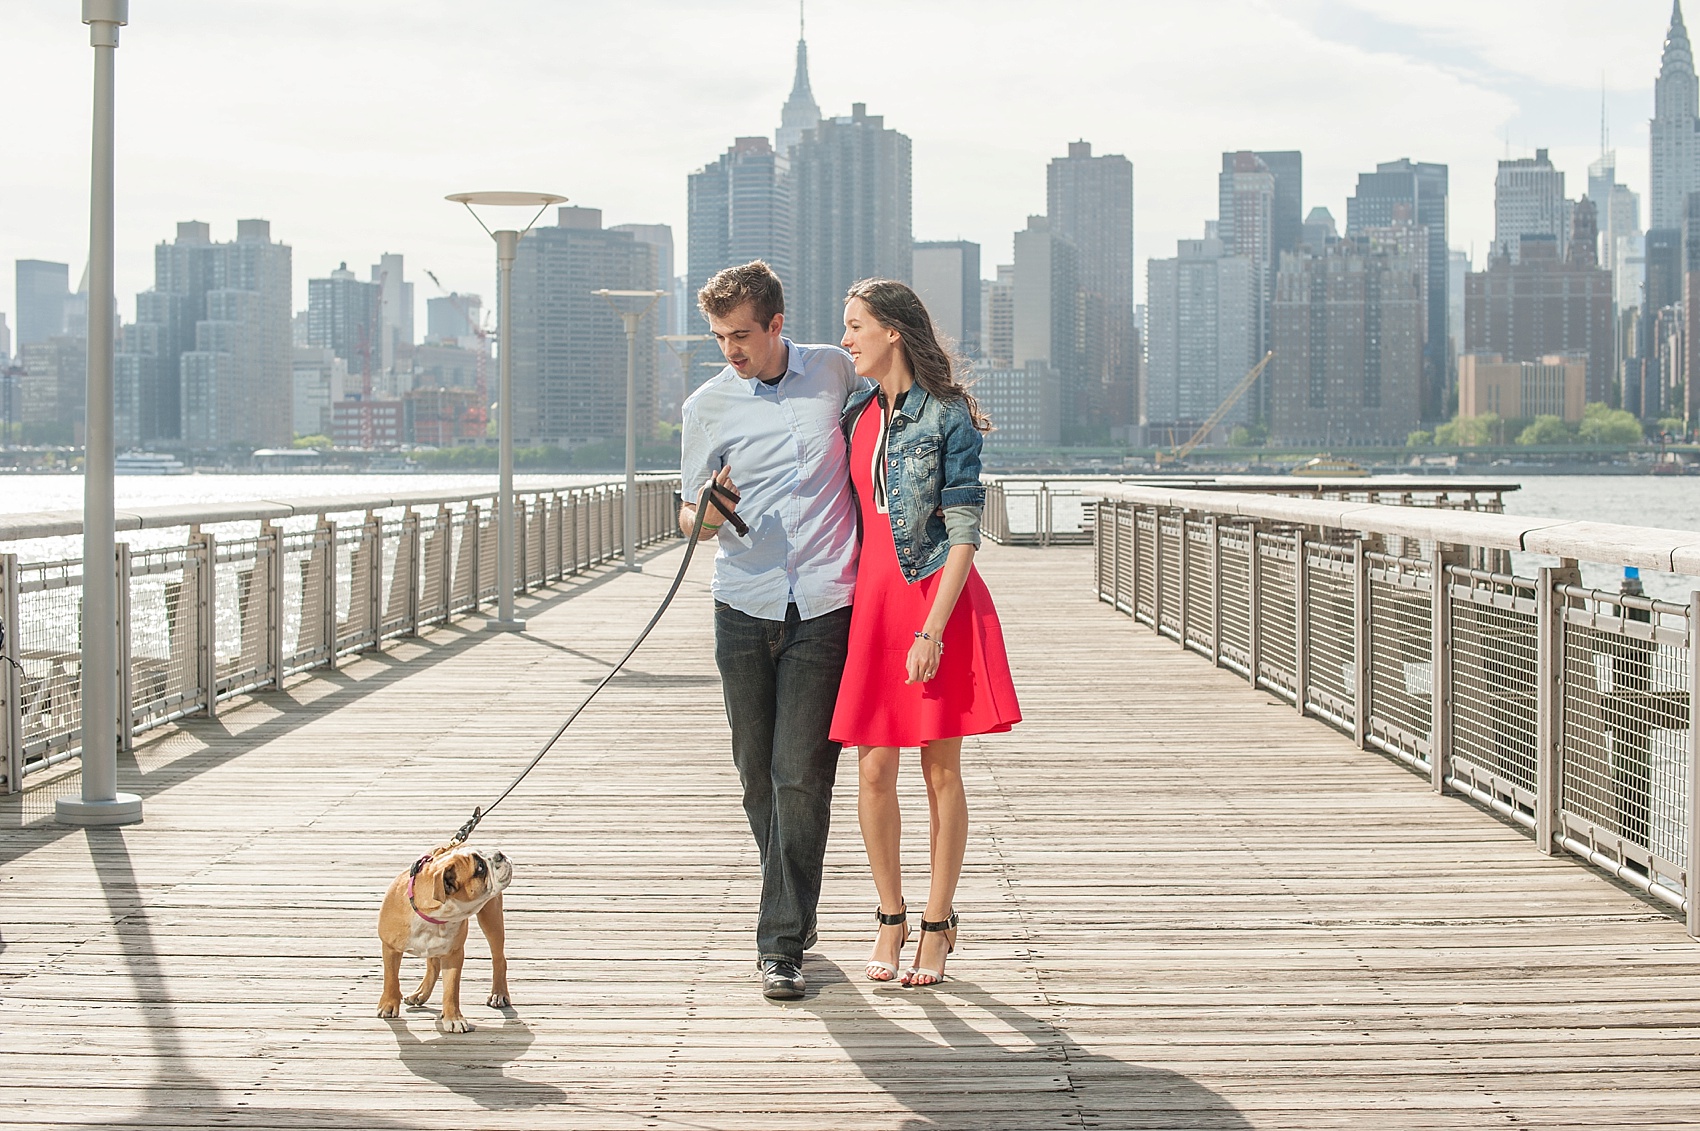 Long Island City waterfront engagement session at Gantry State Park by Mikkel Paige Photography, NYC wedding photographer. Their English Bulldog puppy came along for the photo session!